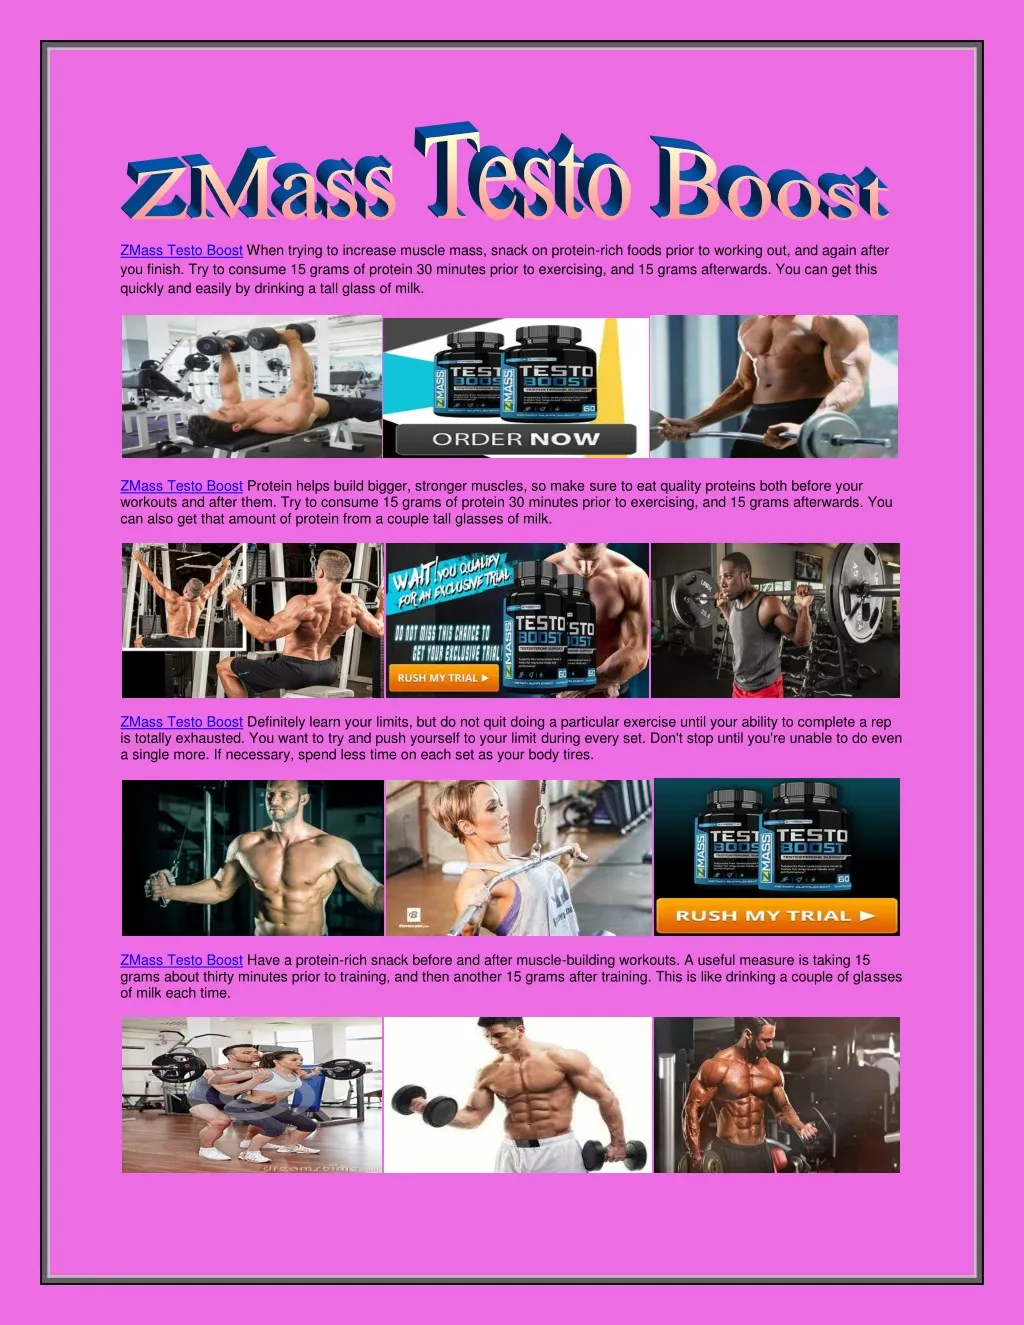 zmass testo boost when trying to increase muscle